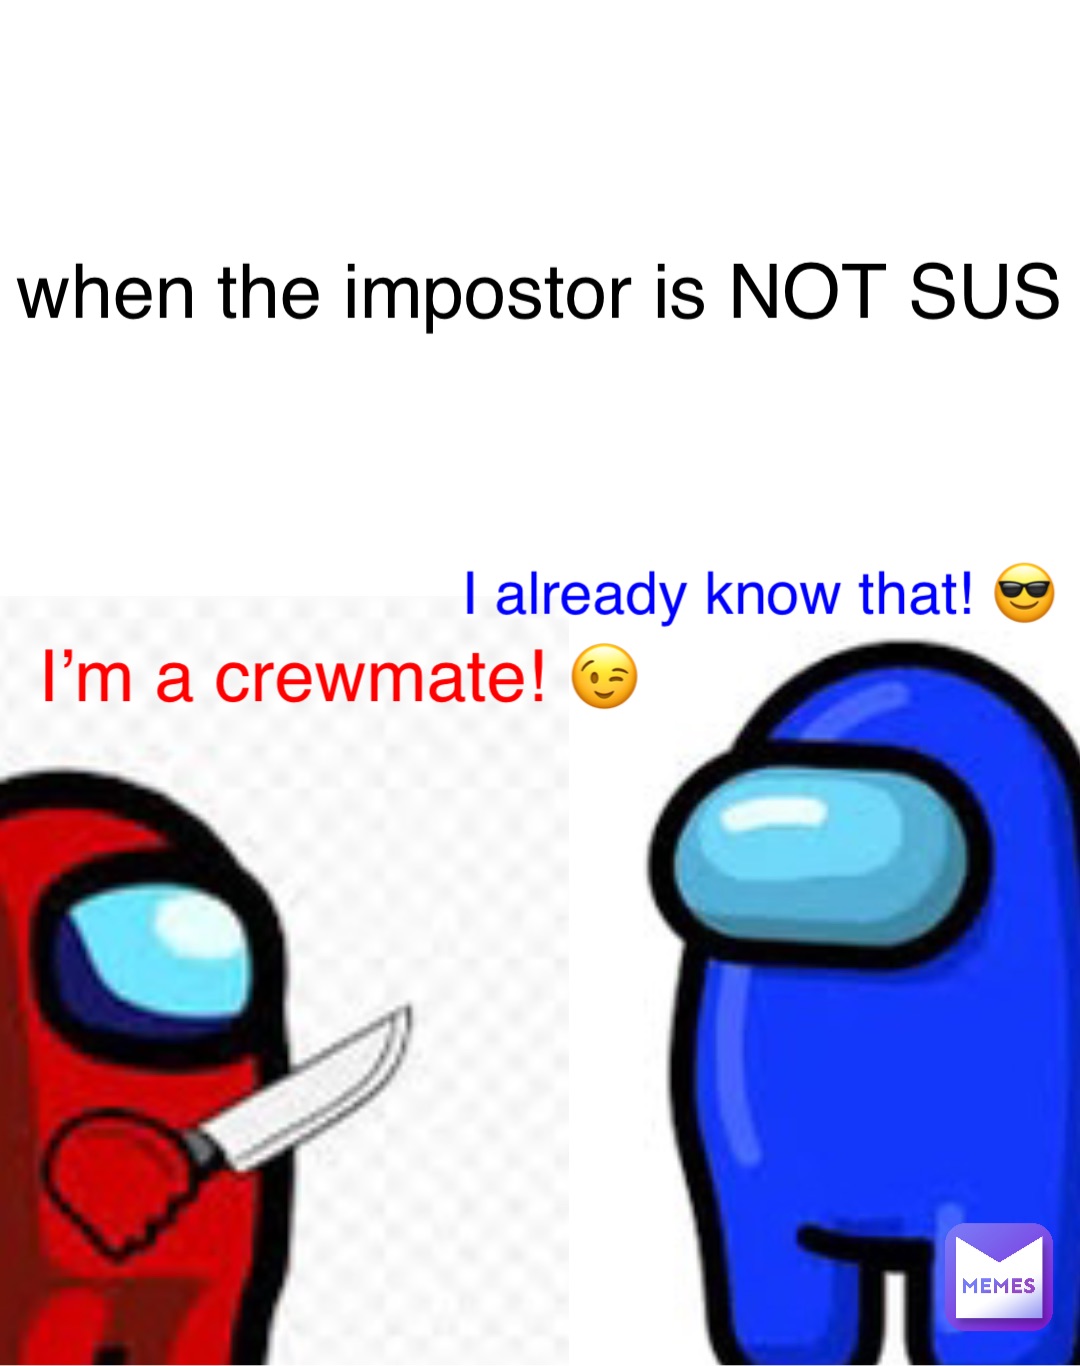 I’m a crewmate! 😉 I already know that! 😎 when the impostor is NOT SUS